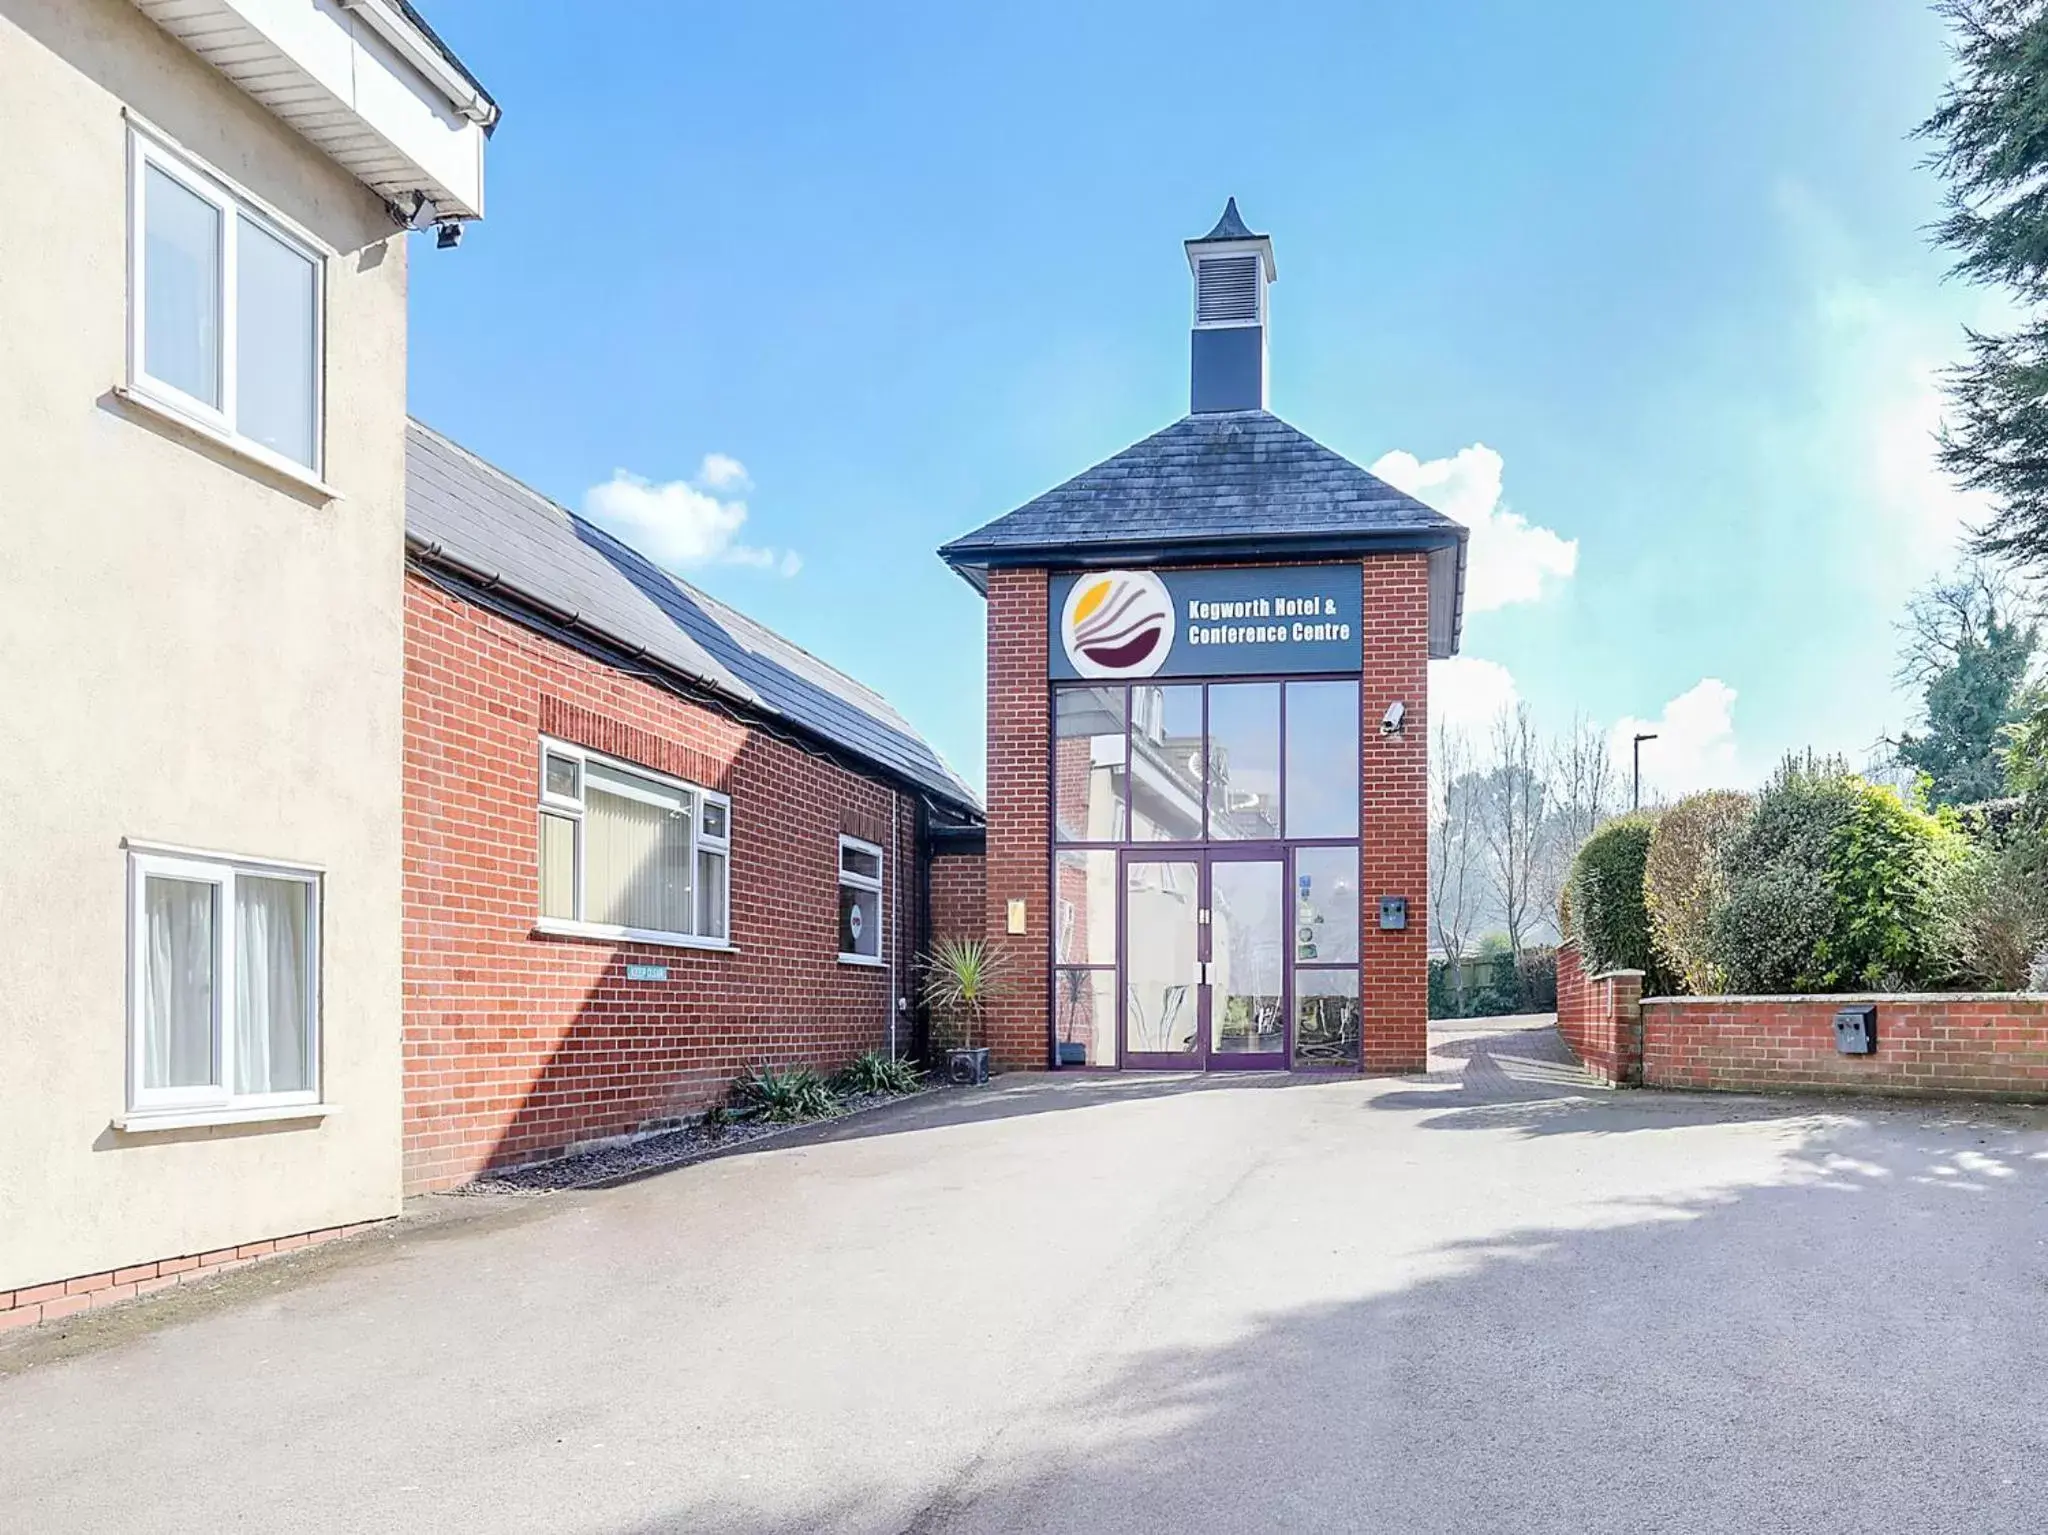 Property Building in Kegworth Hotel & Conference Centre